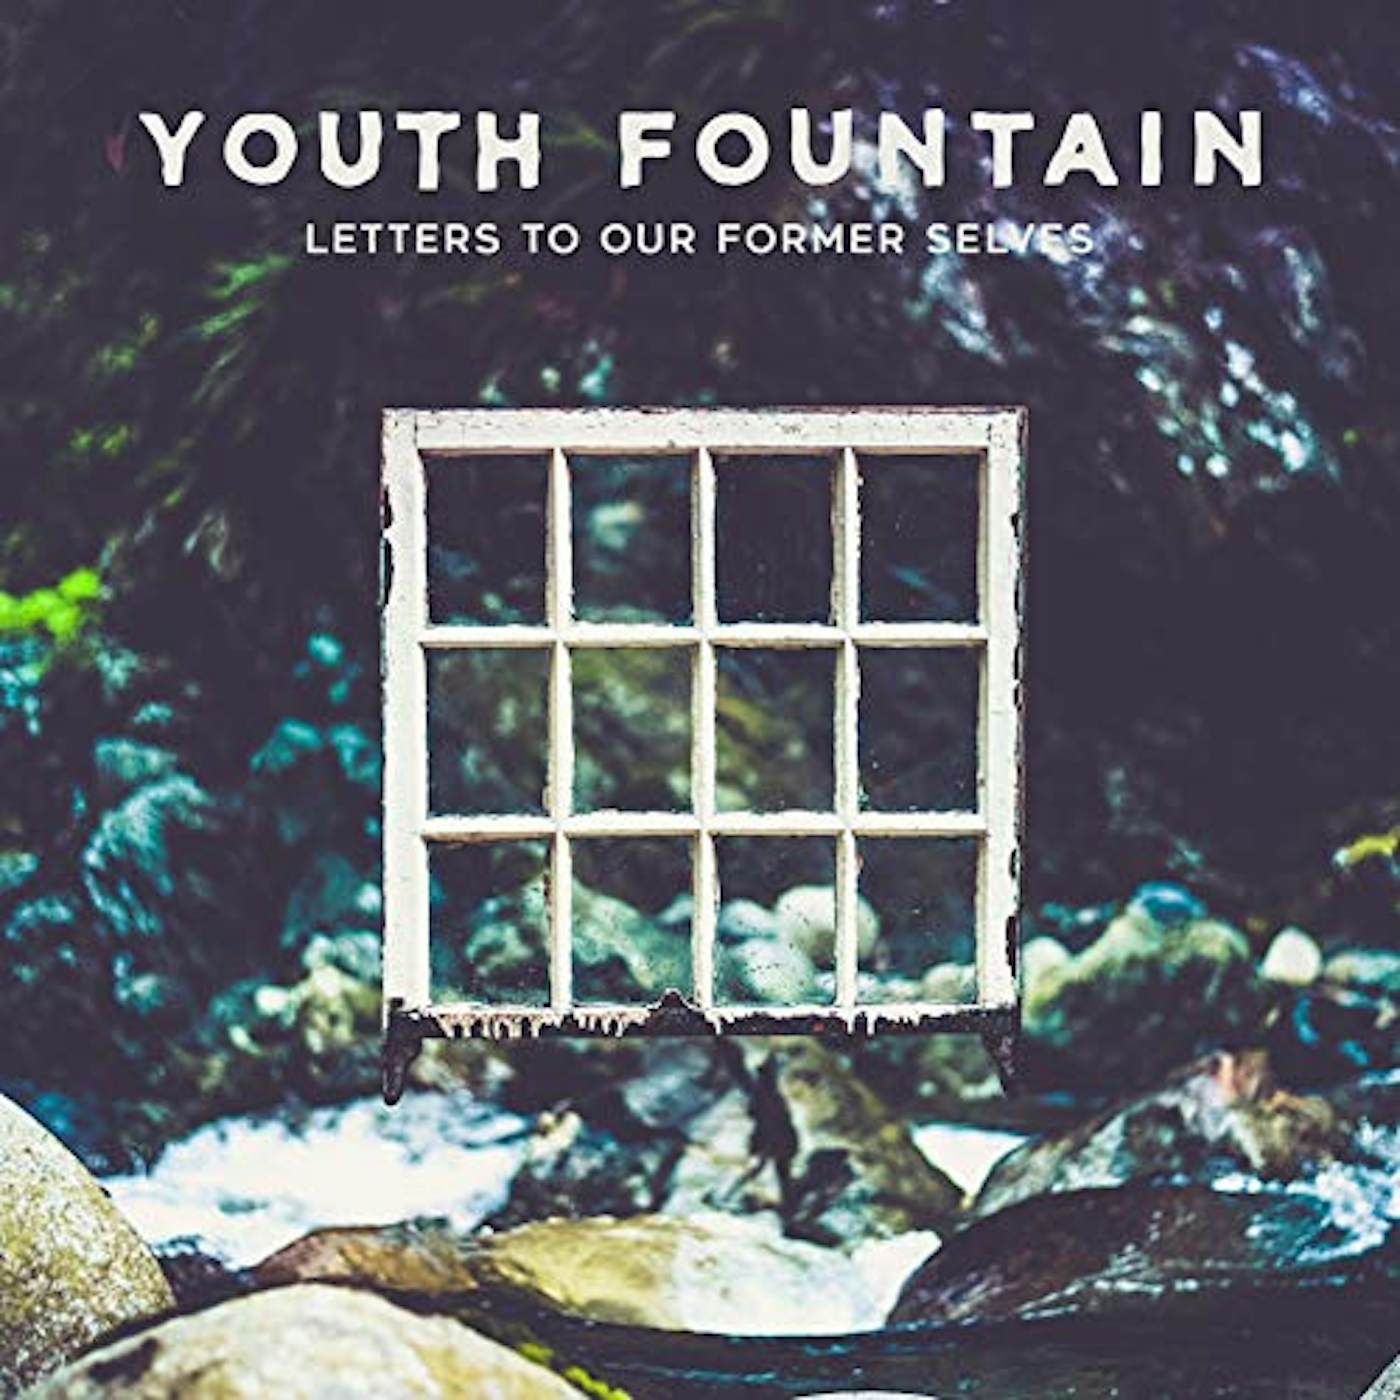 Youth Fountain LETTERS TO OUR FORMER SELVES CD